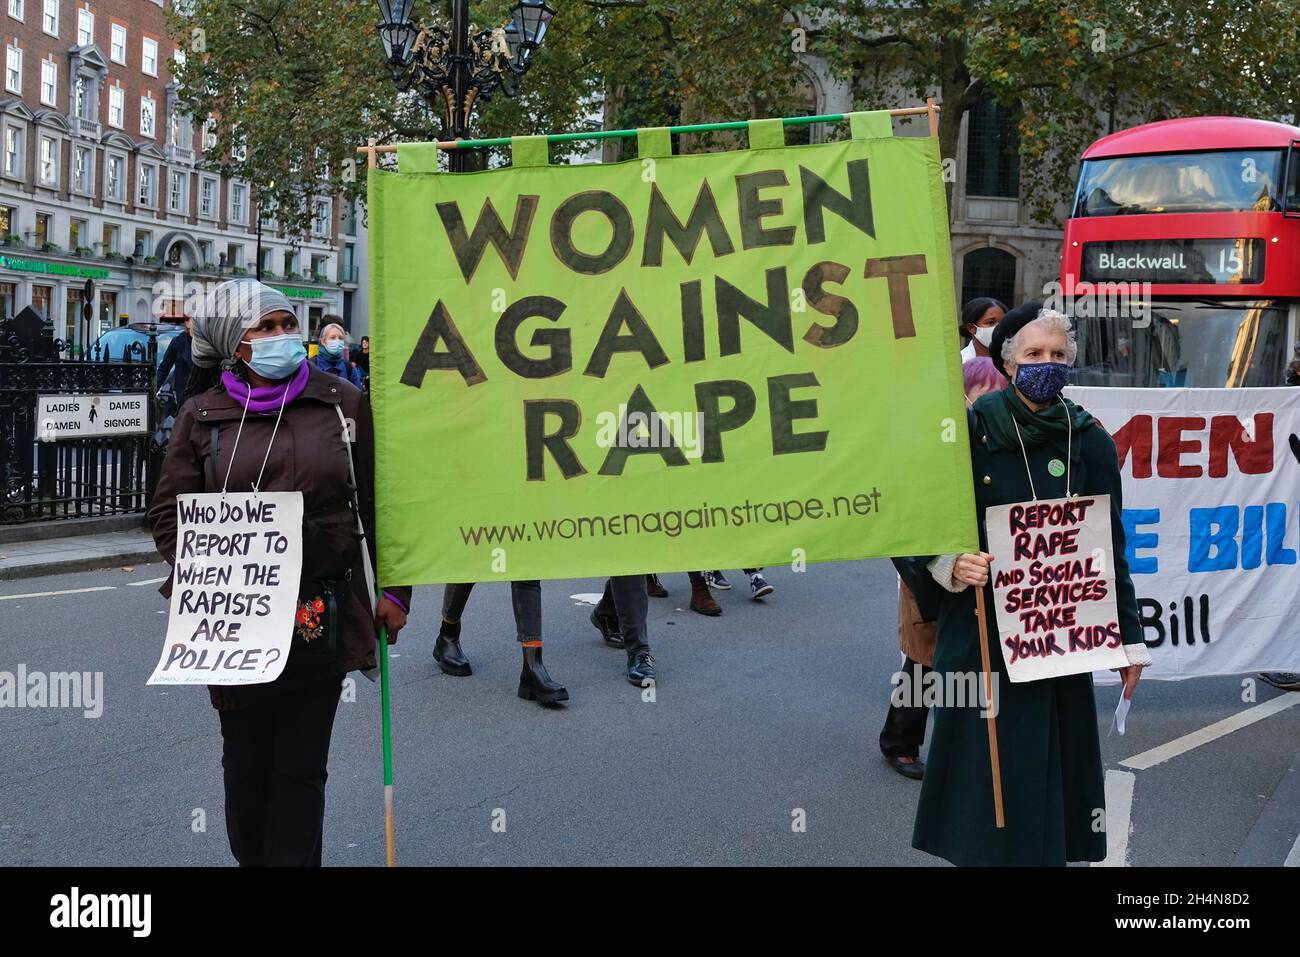 London, UK. Sisters Uncut and other organisations protest police violence against women outside the Royal Courts of Justice. Stock Photo